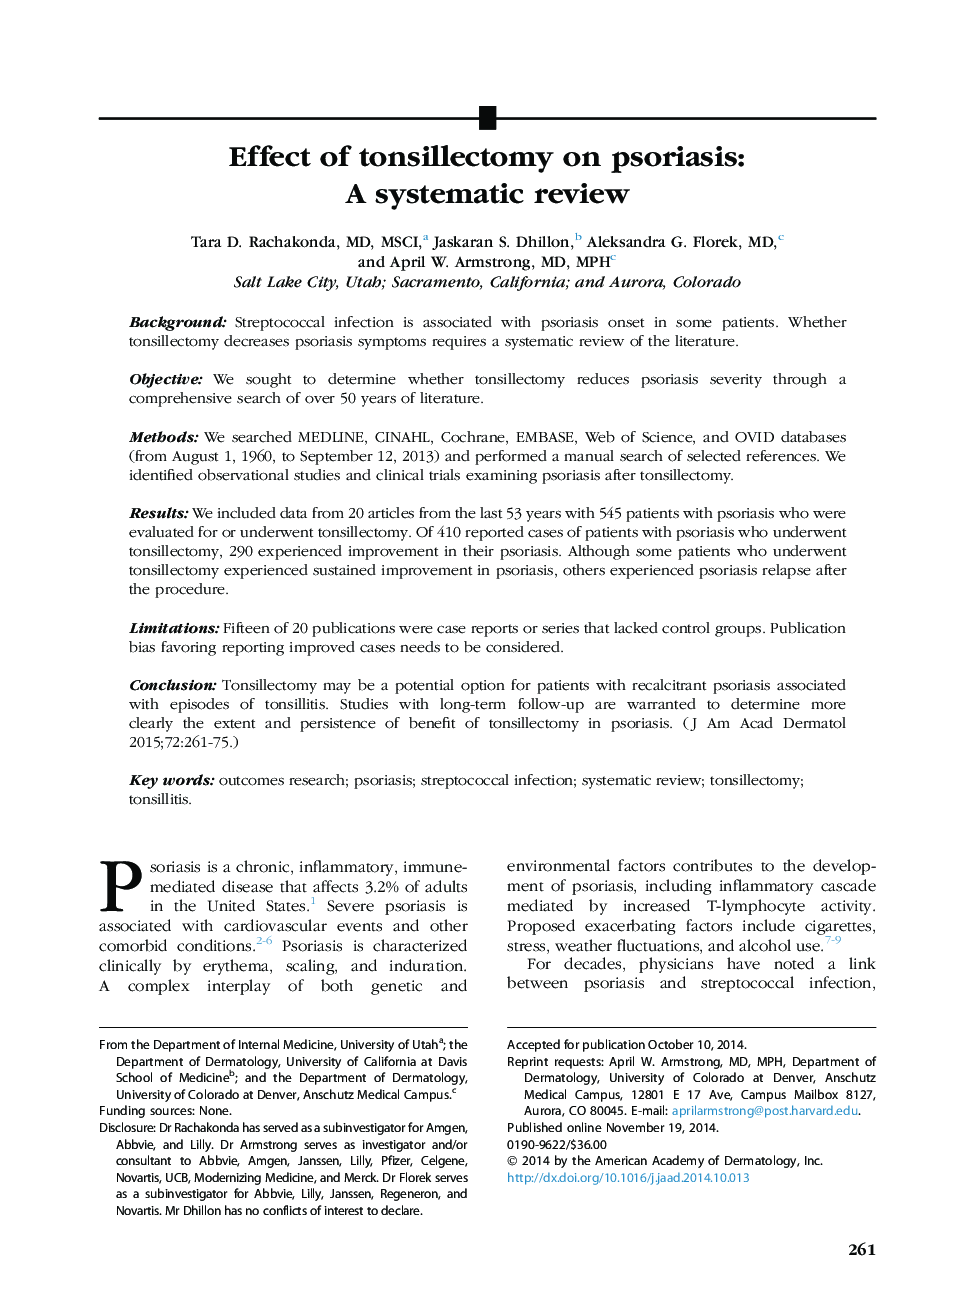 Effect of tonsillectomy on psoriasis: A systematic review 